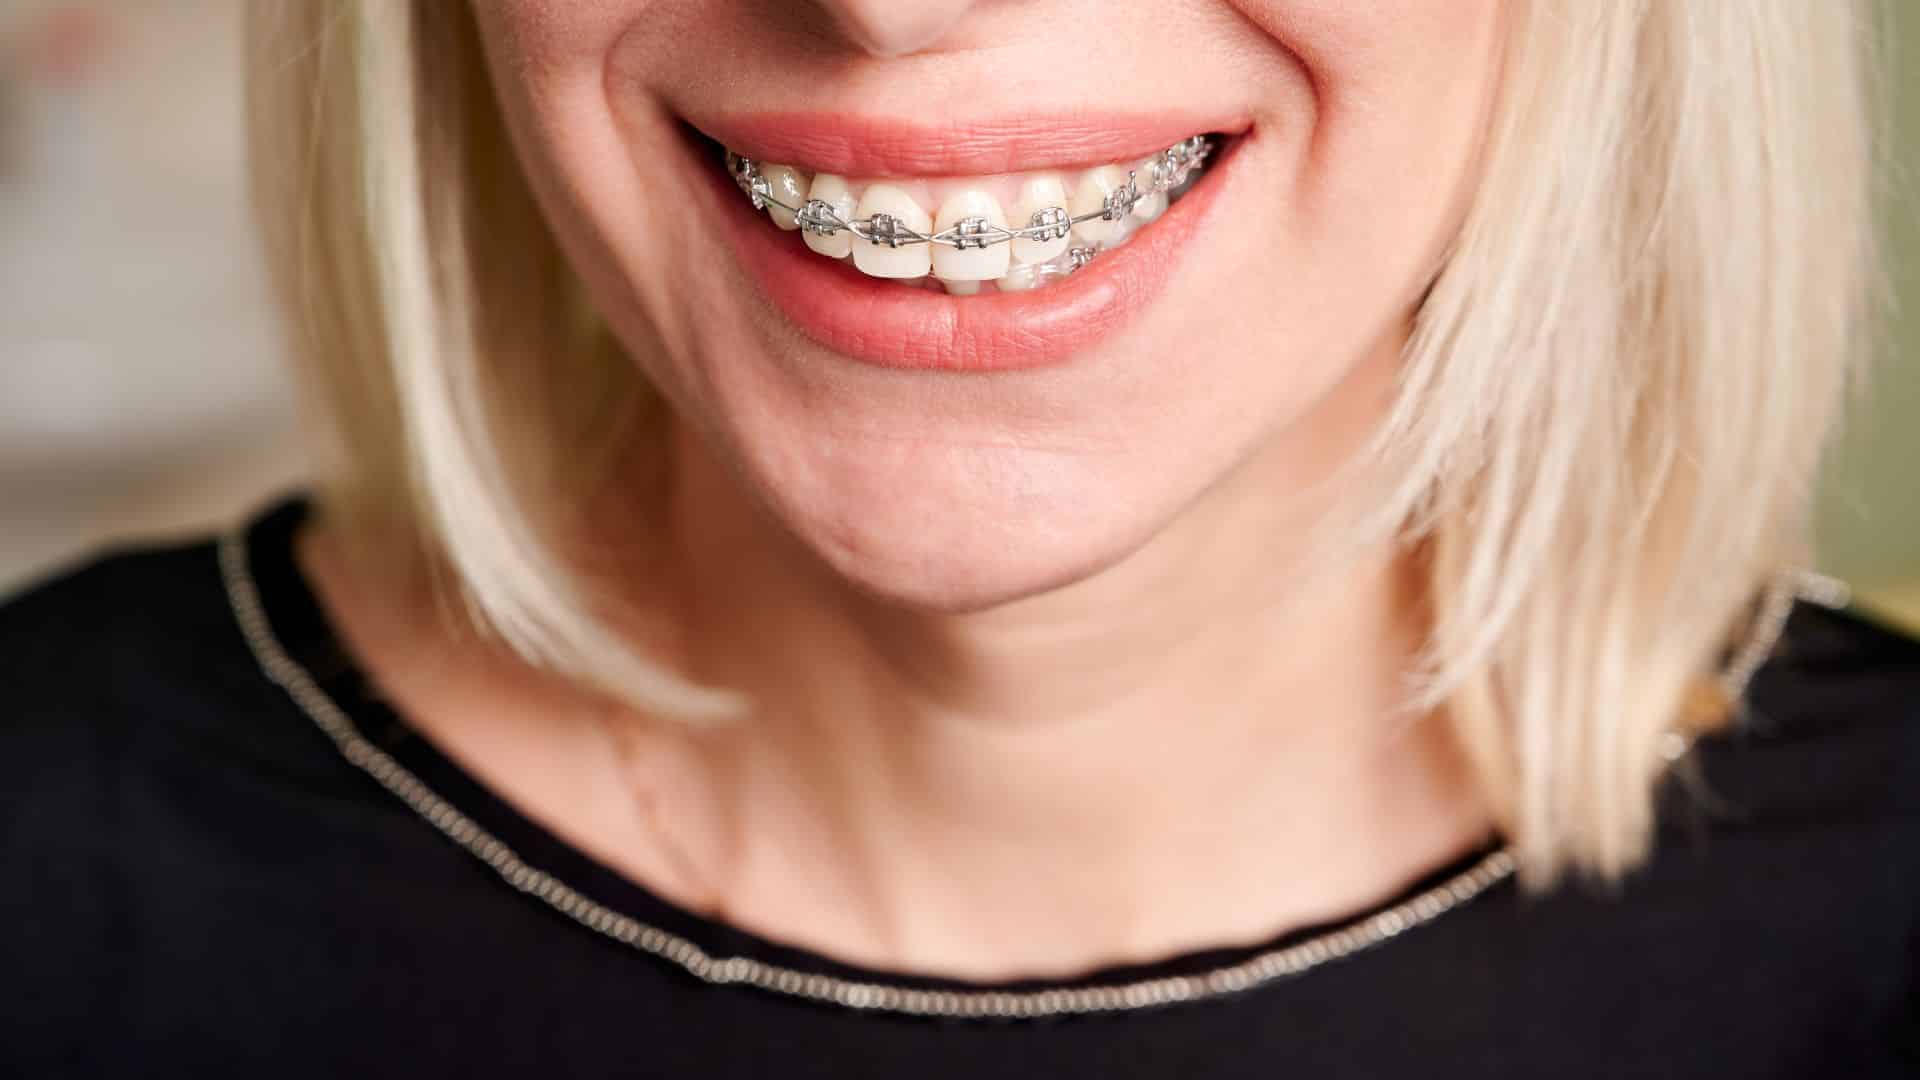 Featured image for “Facts About Adult Braces”